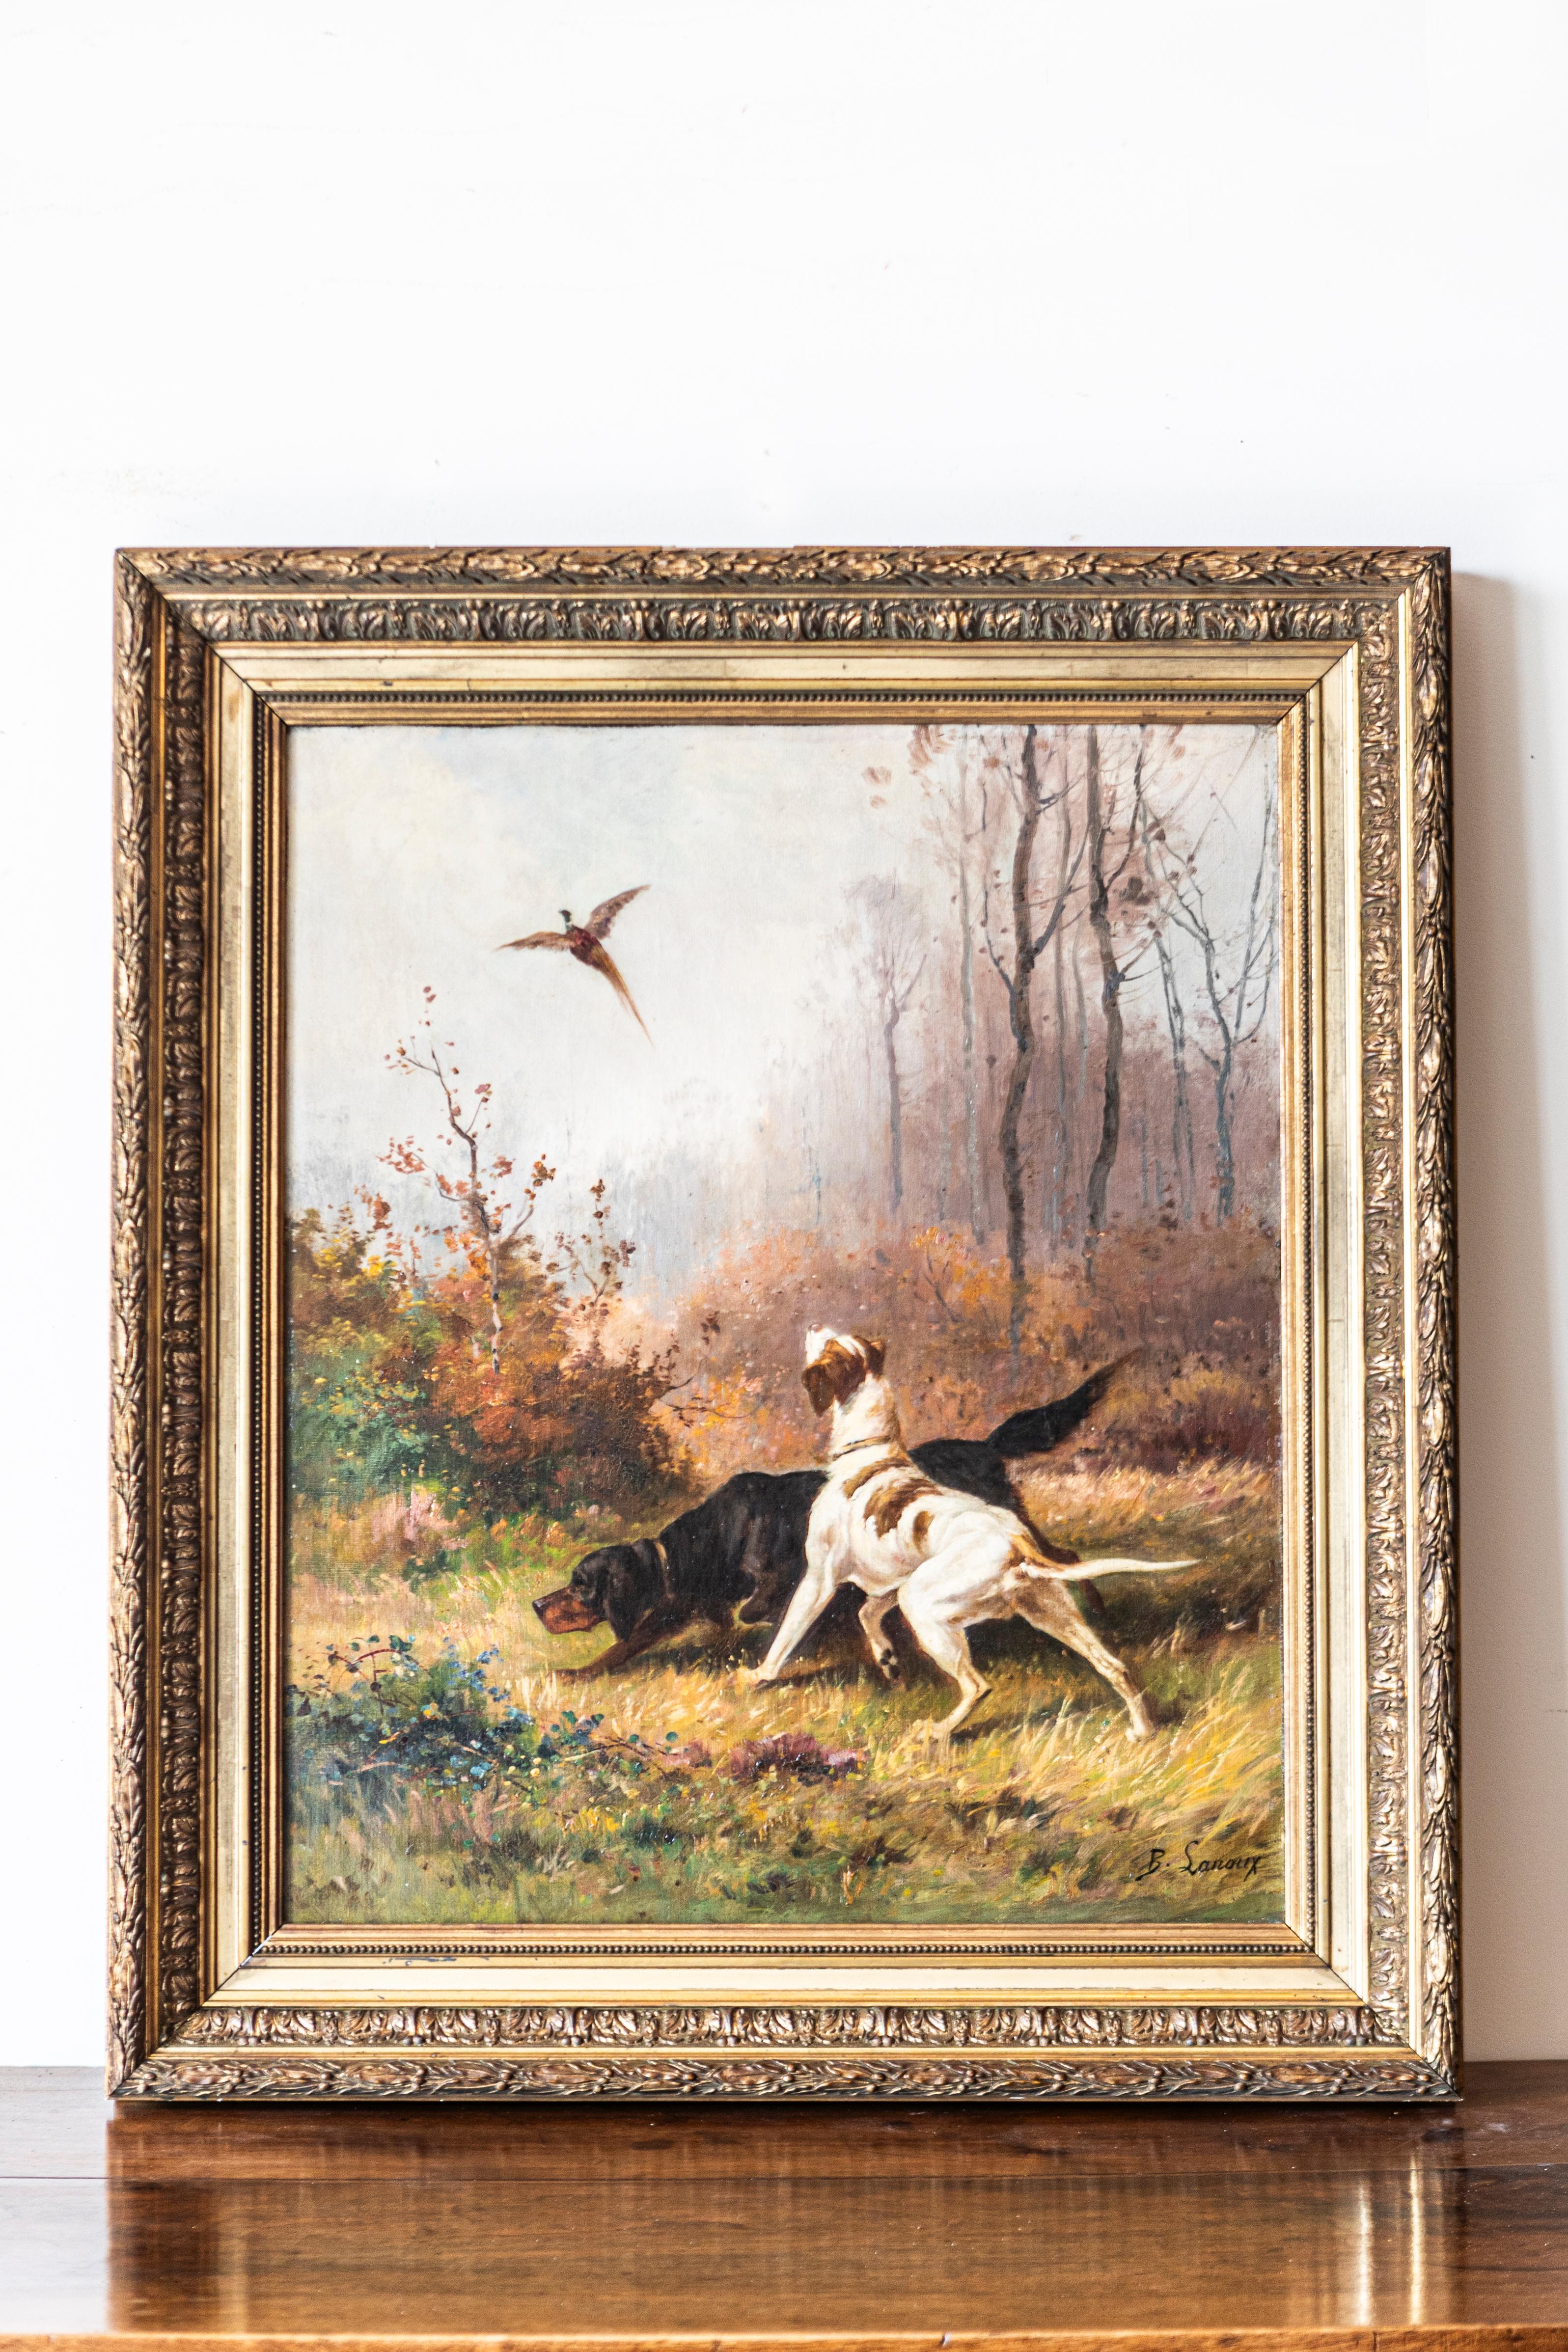 A French 19th century oil on canvas hunting scene painting signed by B. Lanoux depicting two hound dogs and a pheasant. This captivating 19th-century French oil on canvas painting by B. Lanoux, a distinguished artist whose life spanned the 19th and